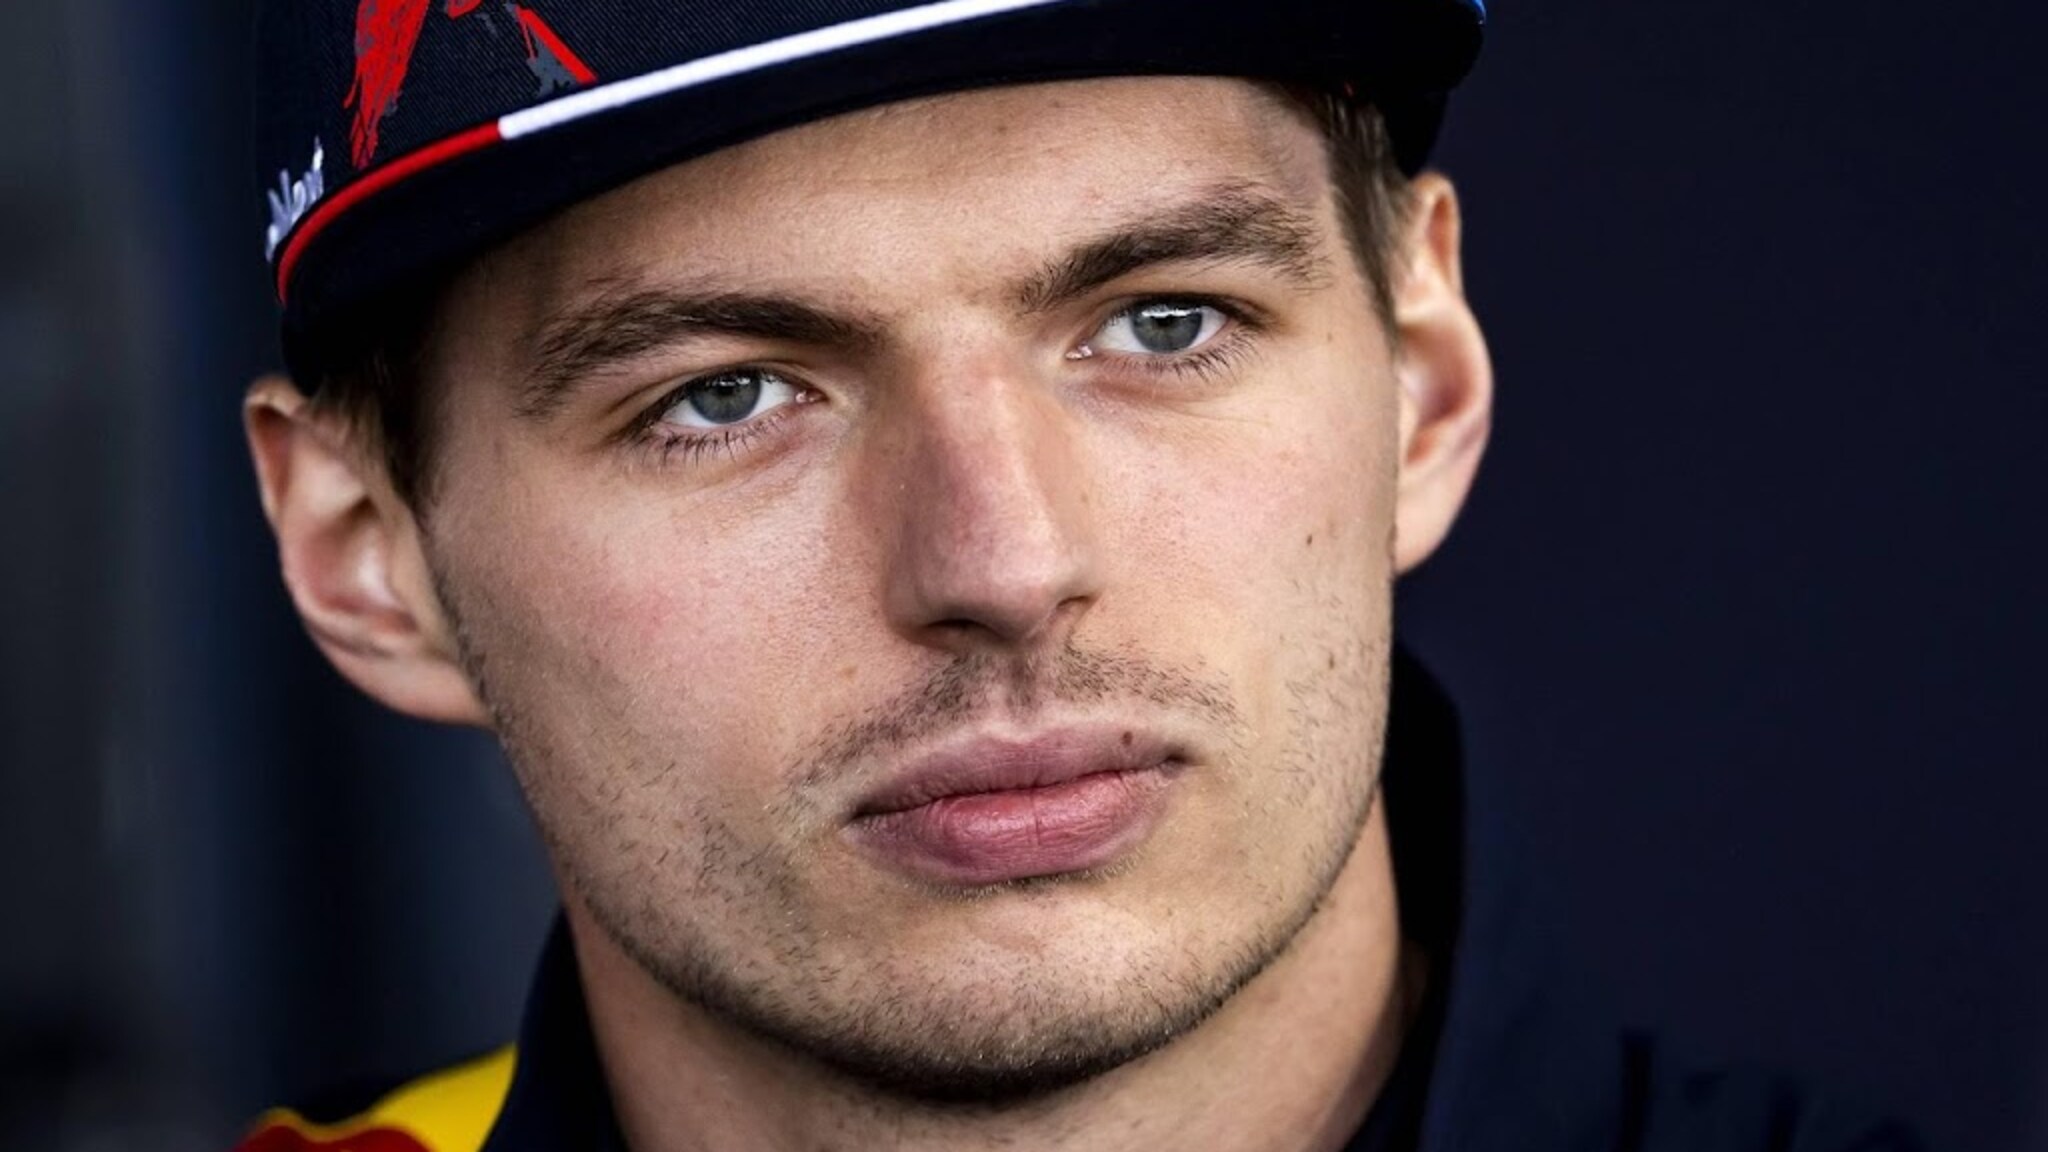 Verstappen collaborates on Netflix series on his own terms